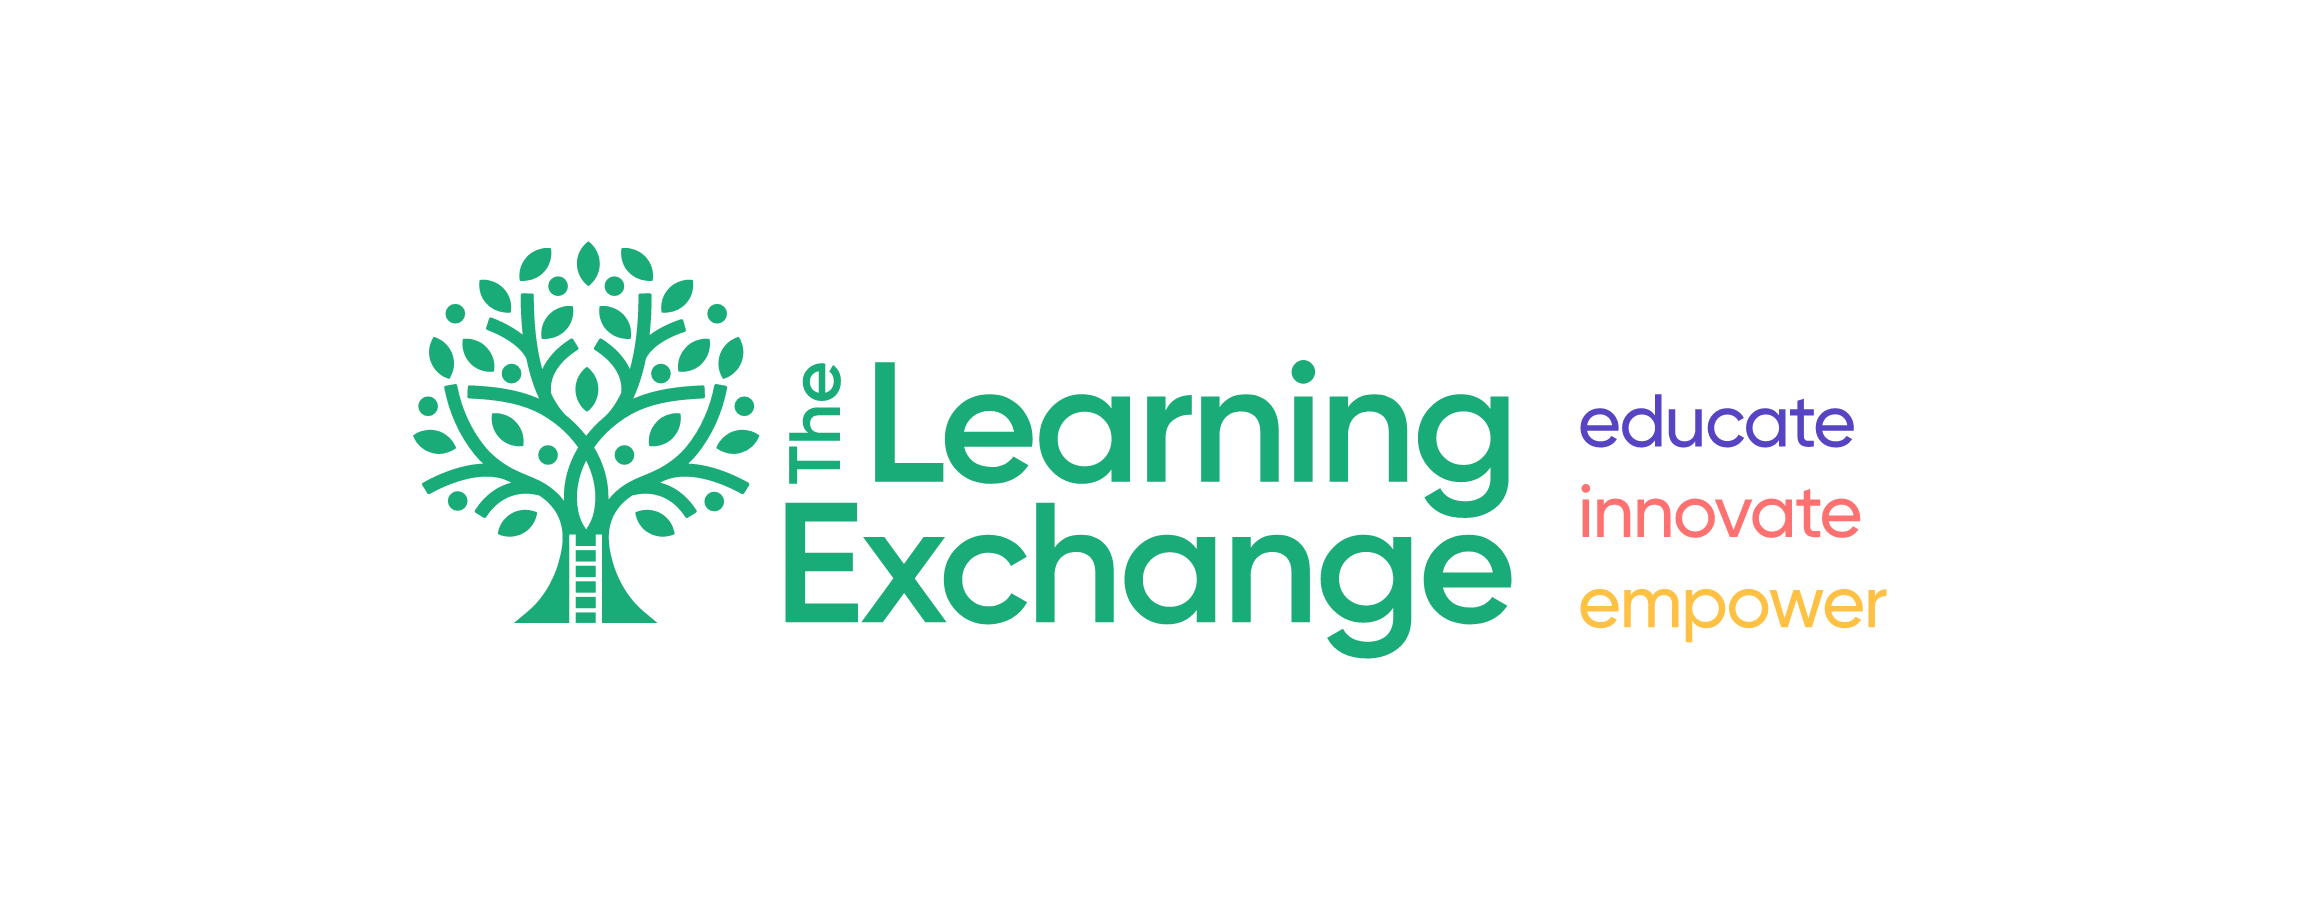 The Learning Exchange - educate, innovate, empower